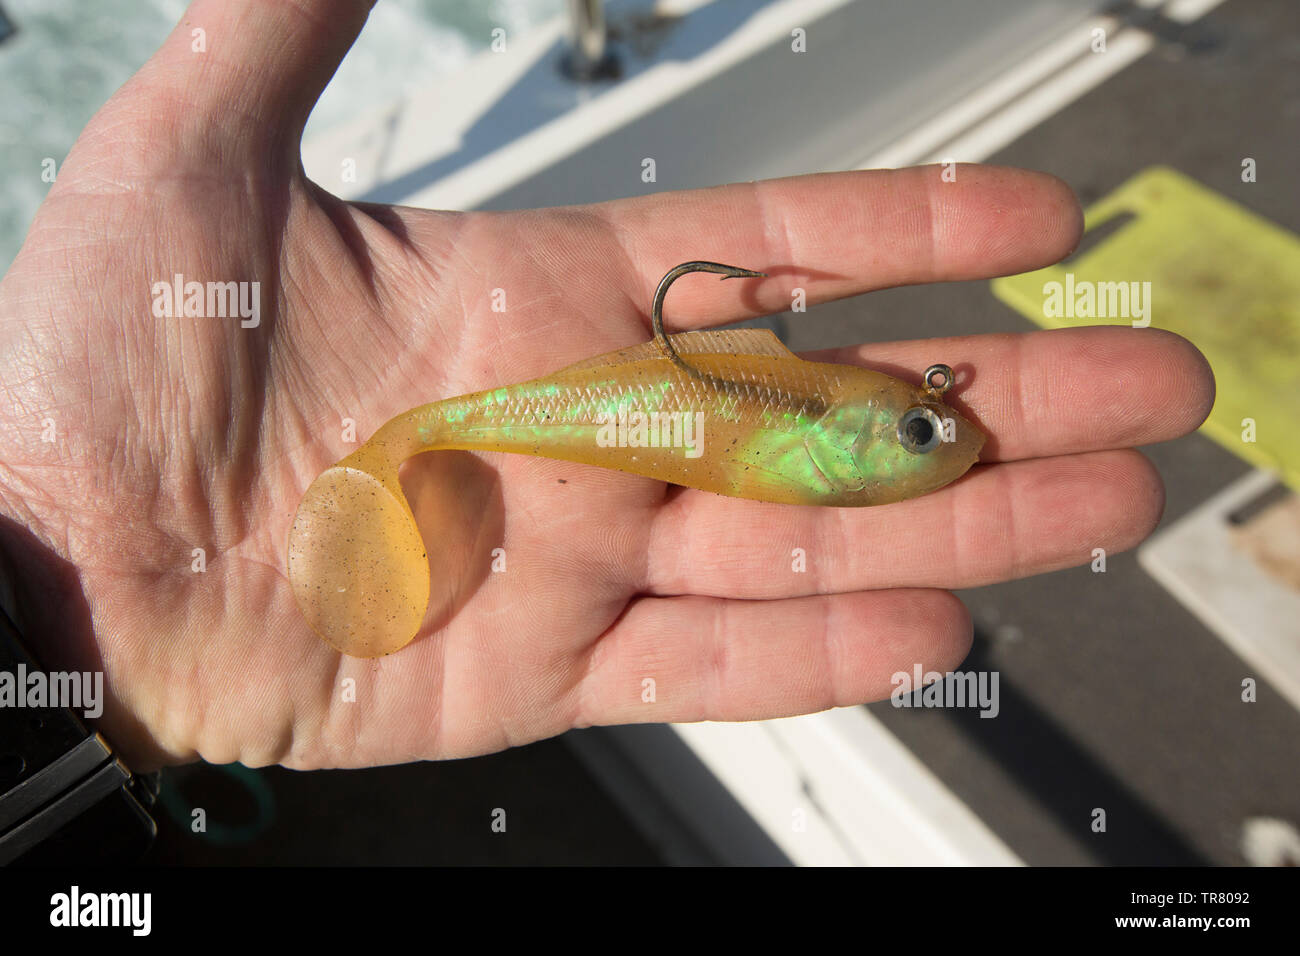 An artificial lure used for catching pollack, bass and cod from a boat when drifting over wrecks and reefs. English Channel Dorset England UK GB Stock Photo